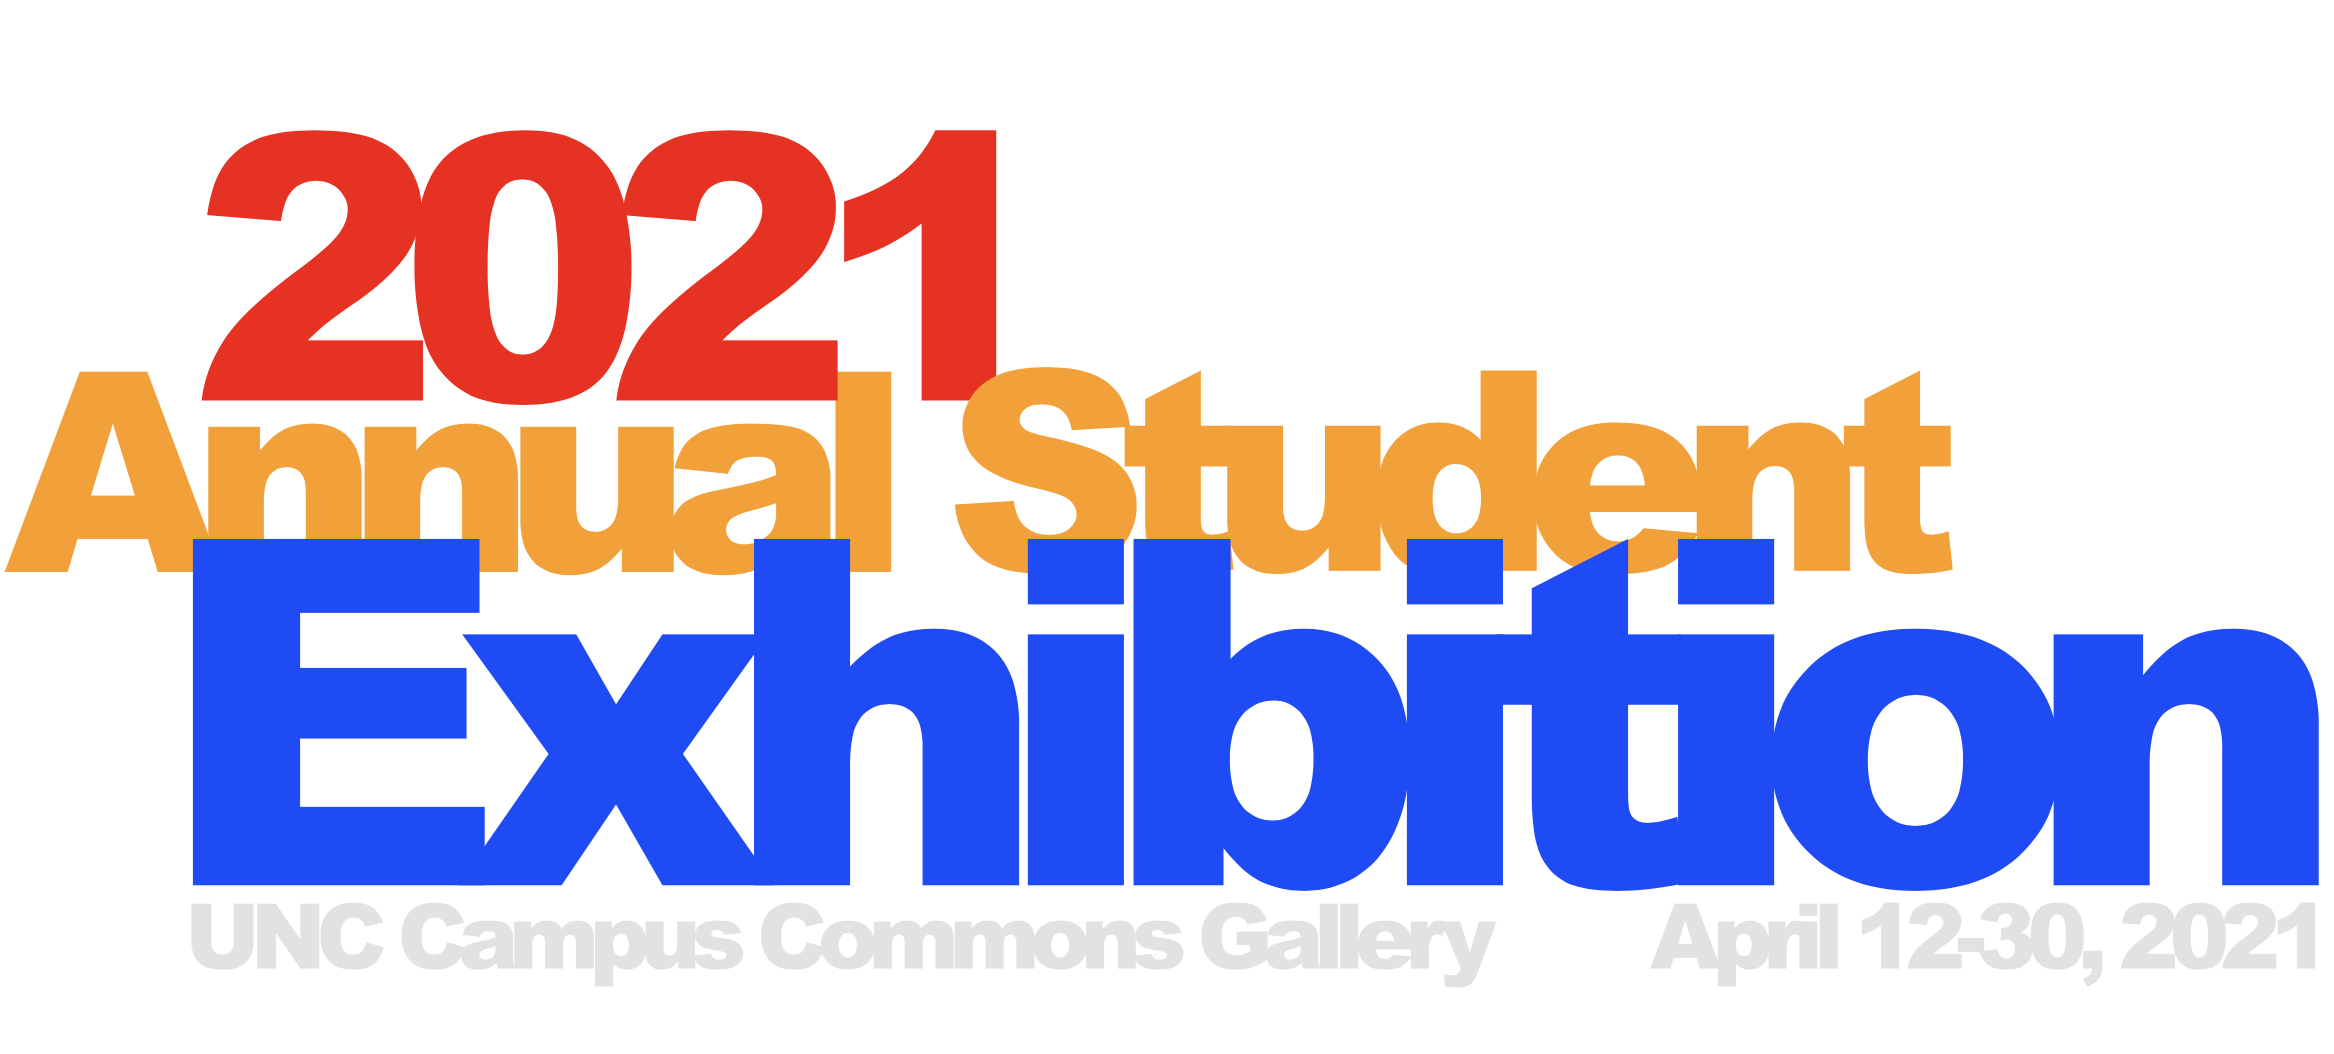 2021 Annual Student Exhibition